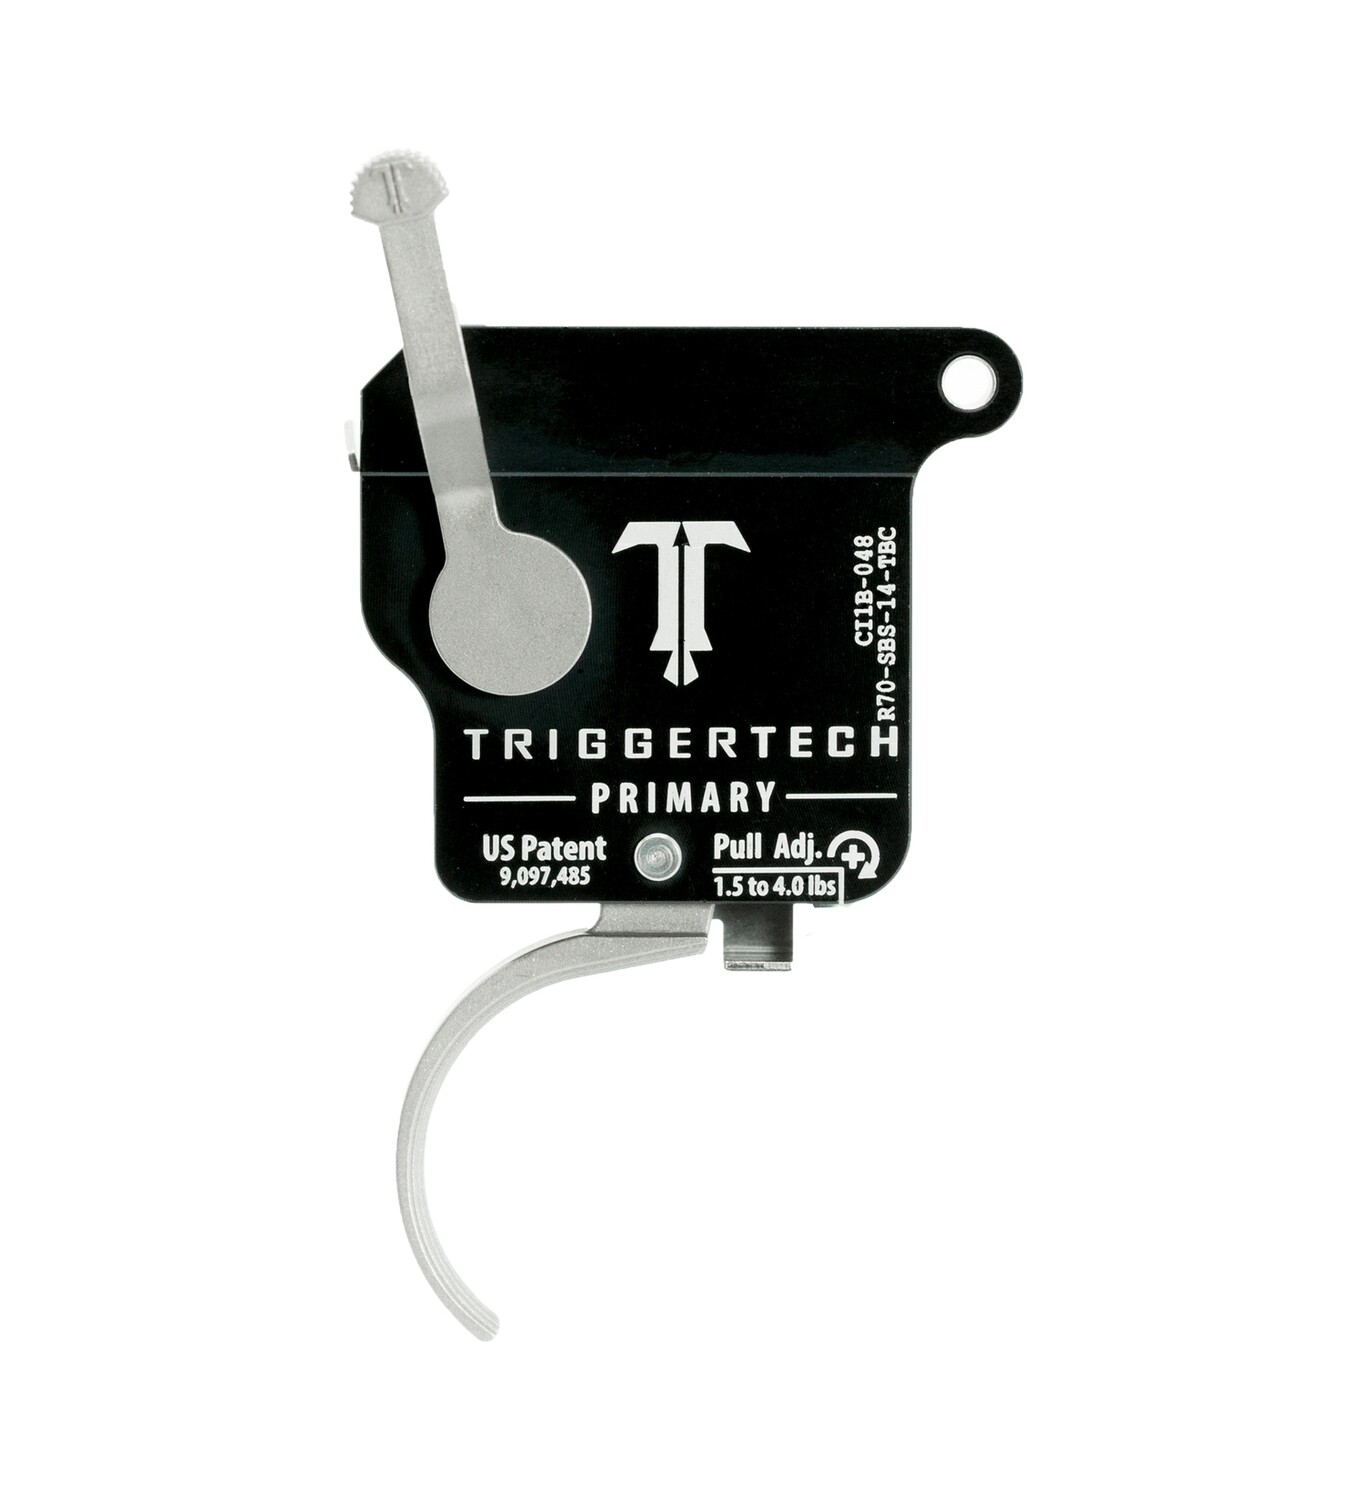 TriggerTech Primary Curved 1.5-4lb Trigger Remington 700